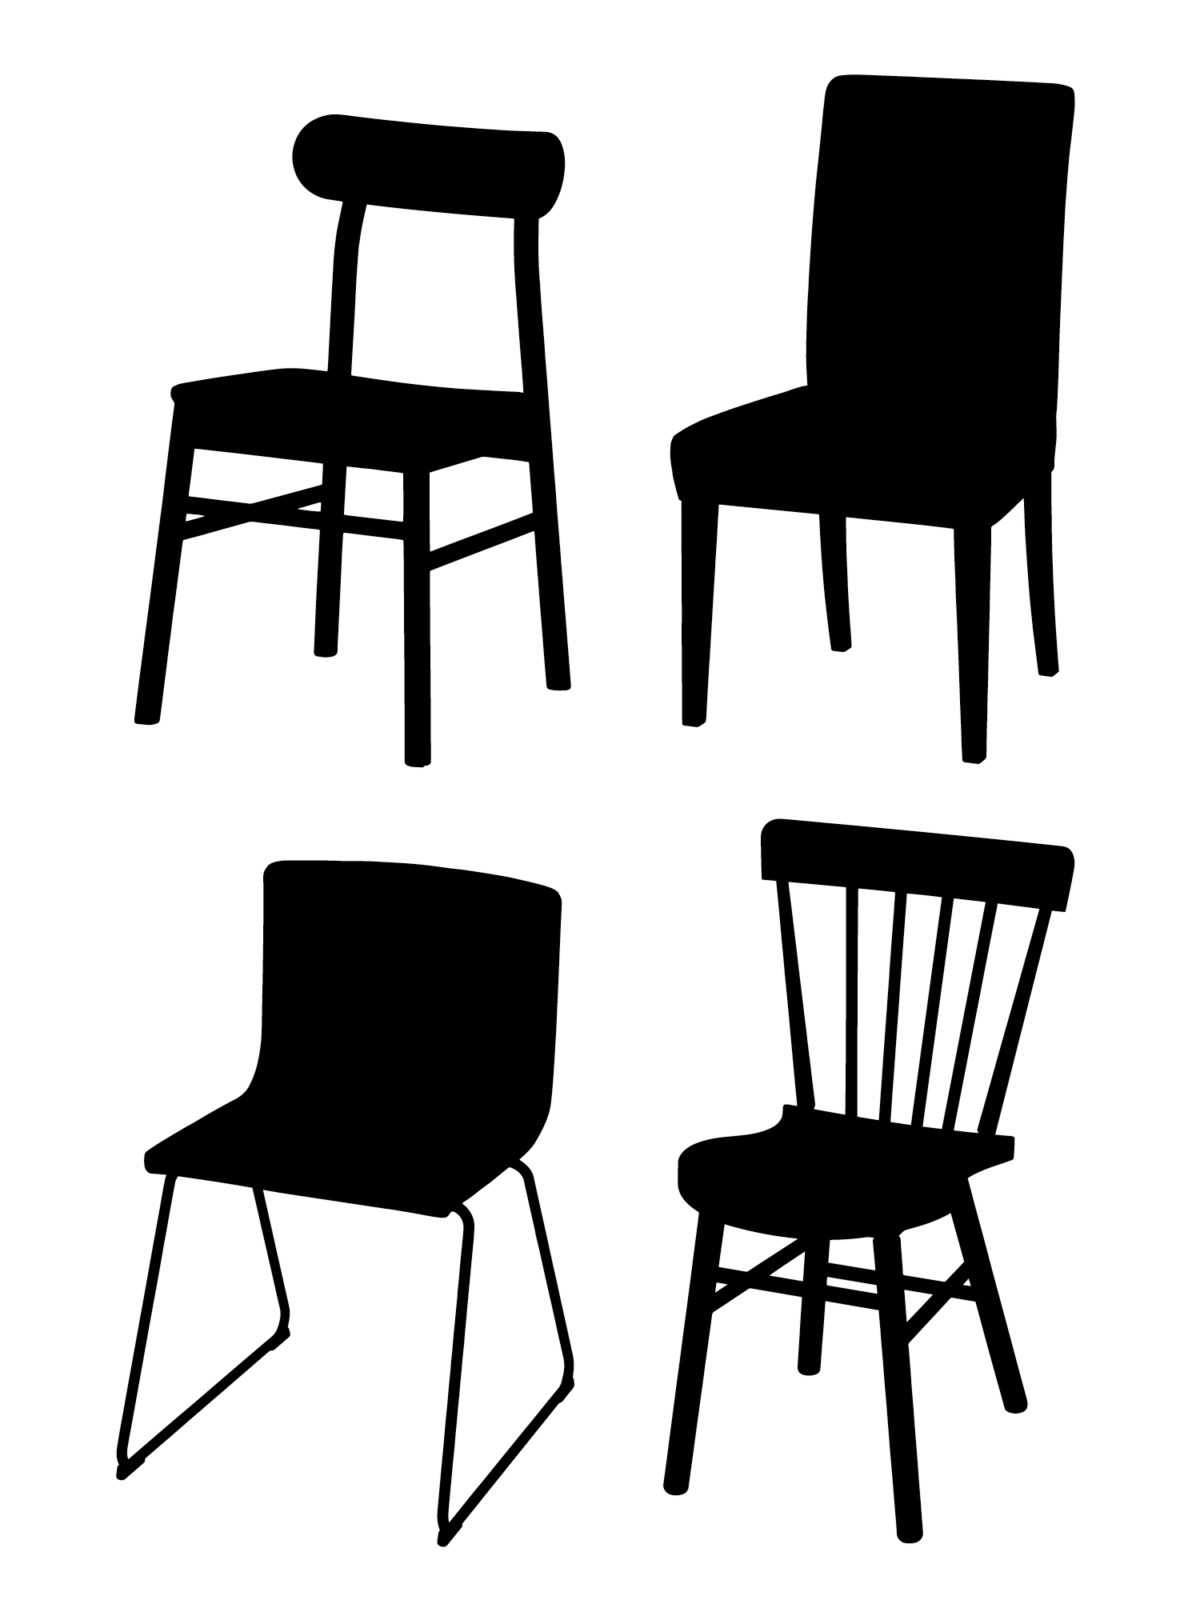 Black silhouettes of four simple chairs in different styles.